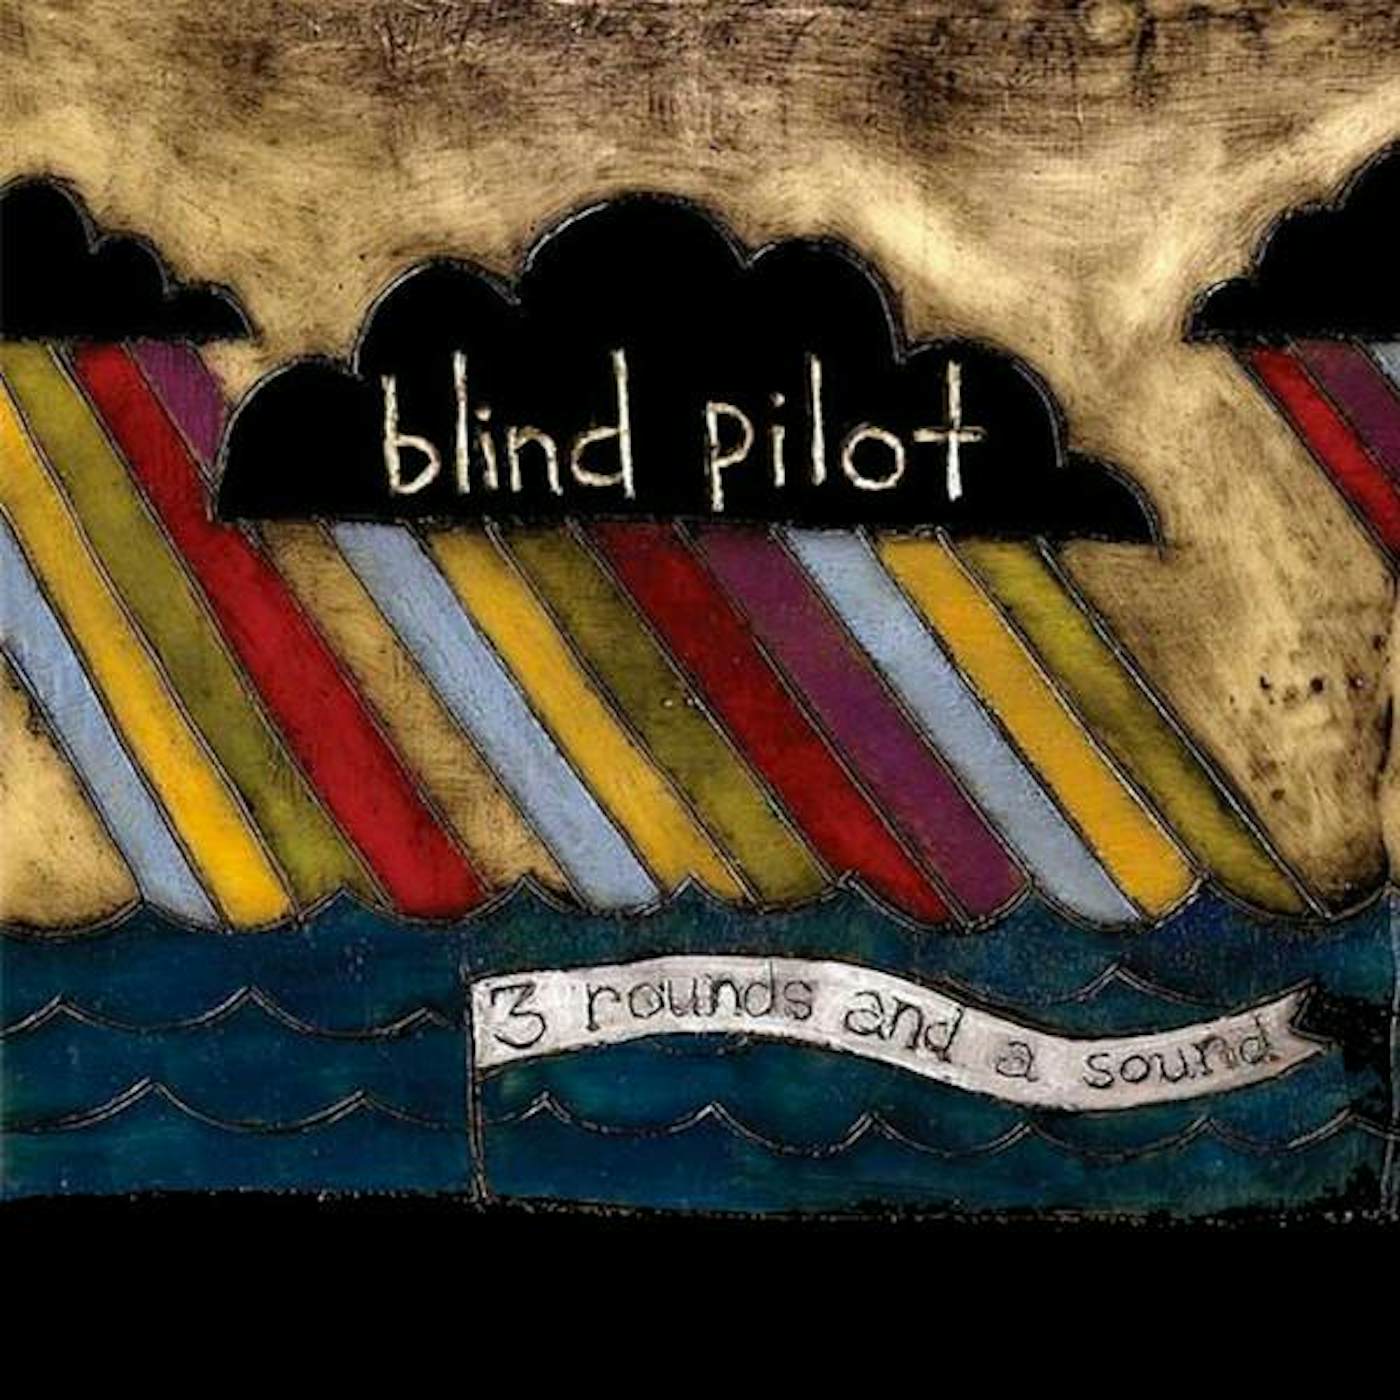 Blind Pilot 3 ROUNDS AND A SOUND Vinyl Record